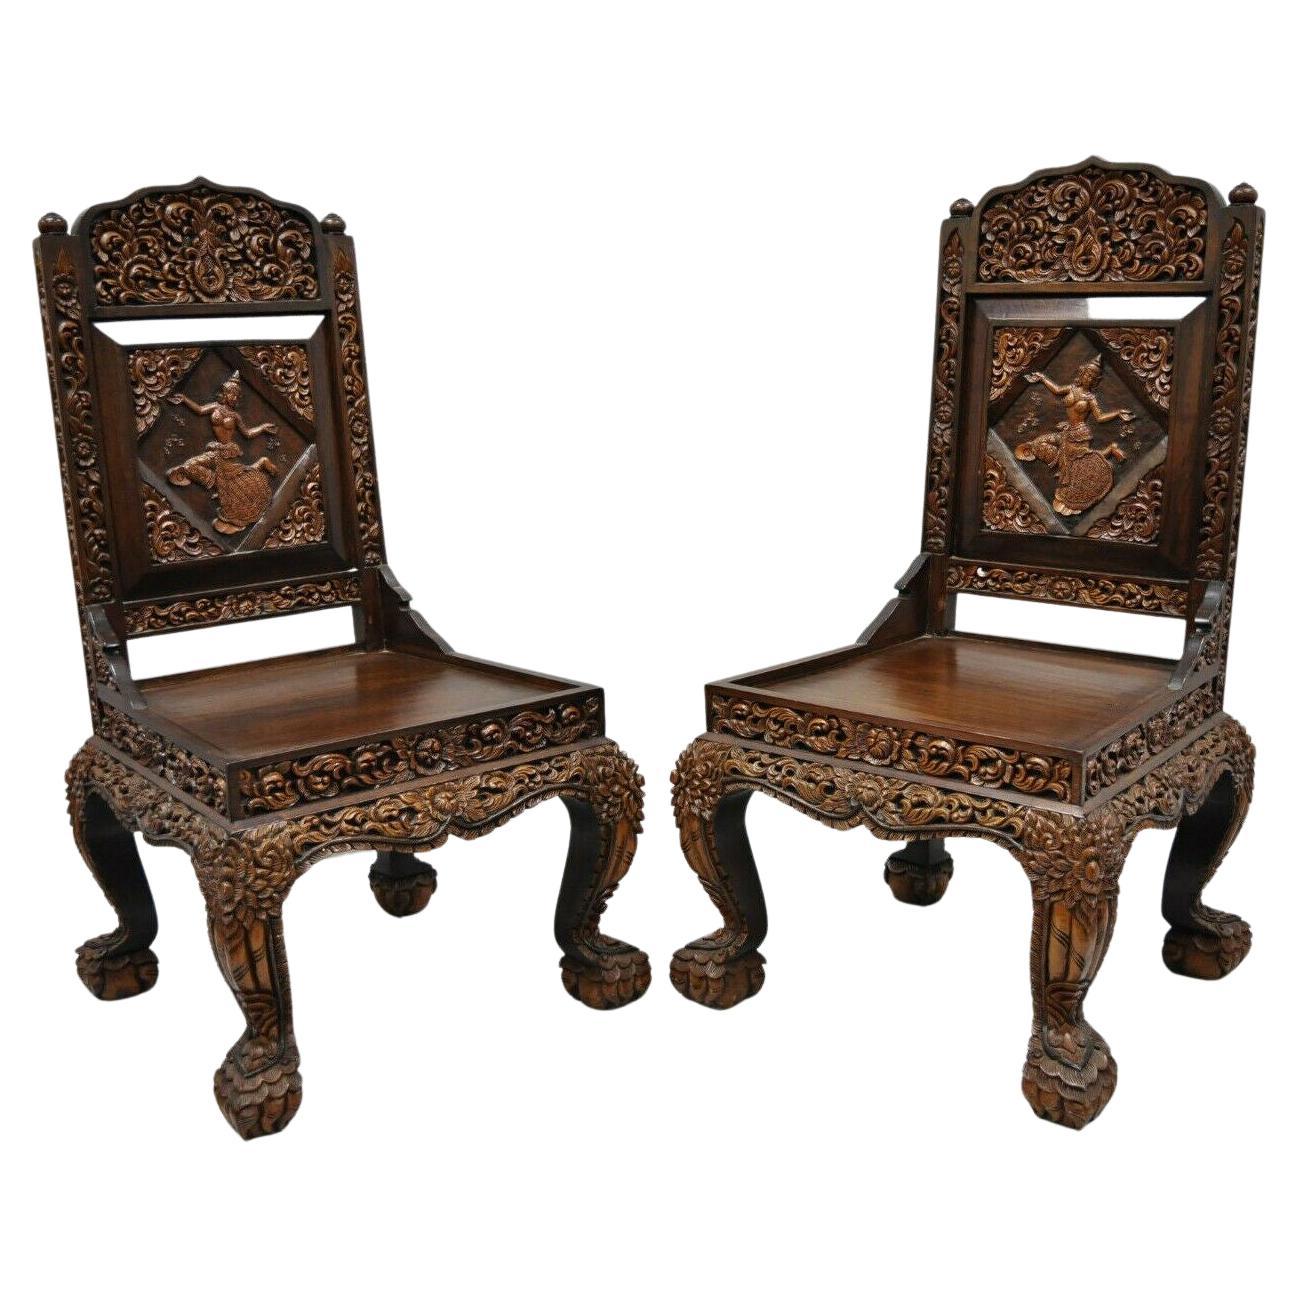 Hand-Carved Thai Oriental Teak Wood Dining Chairs with Dancing Female, a Pair